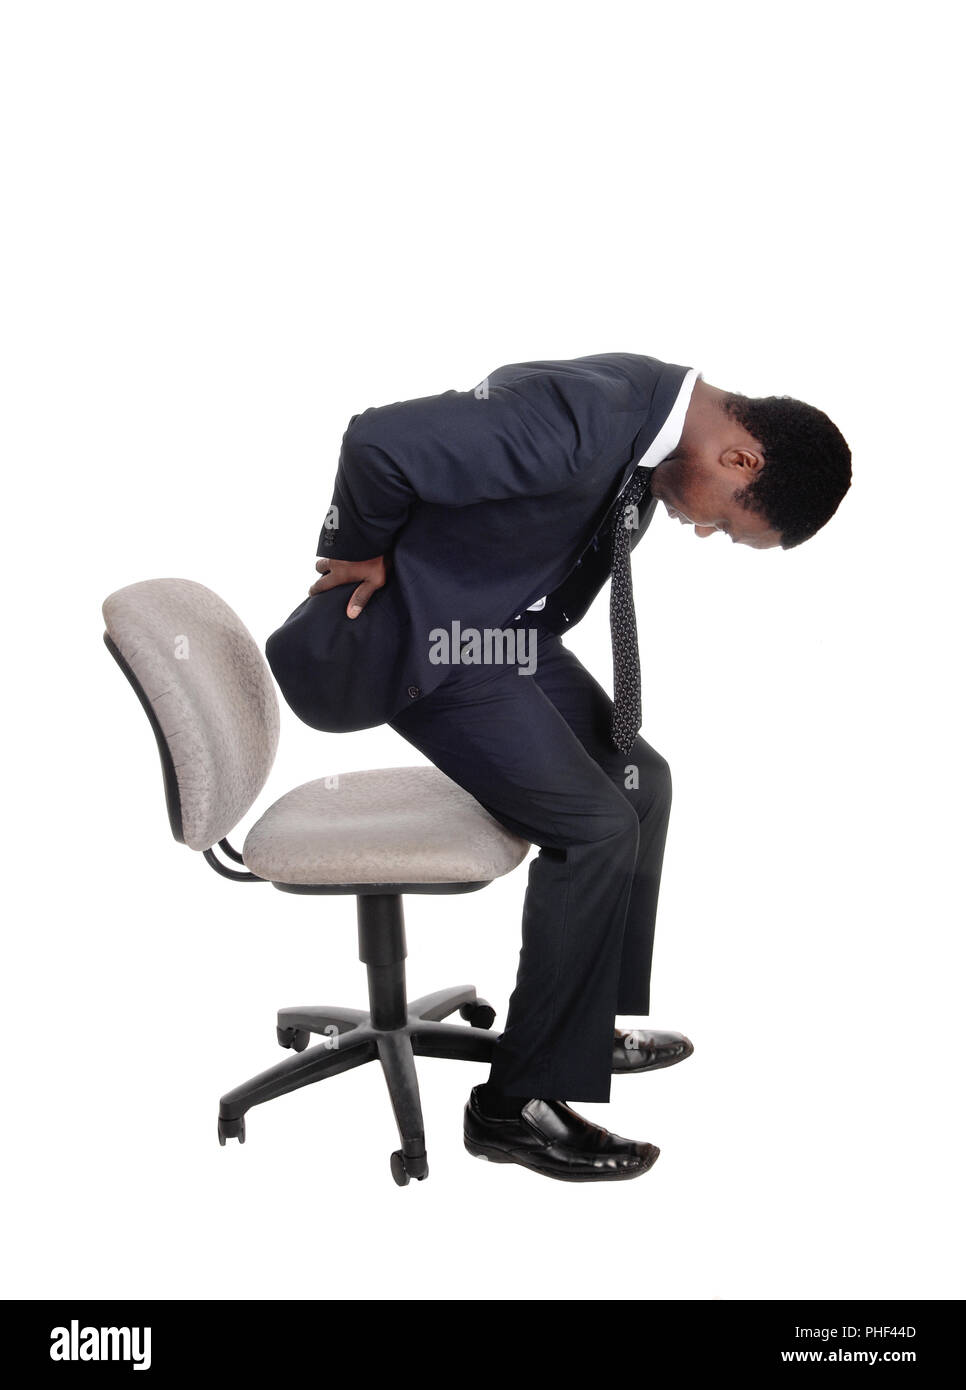 Man With Back Pain Getting Up From Chair Stock Photo 217306109